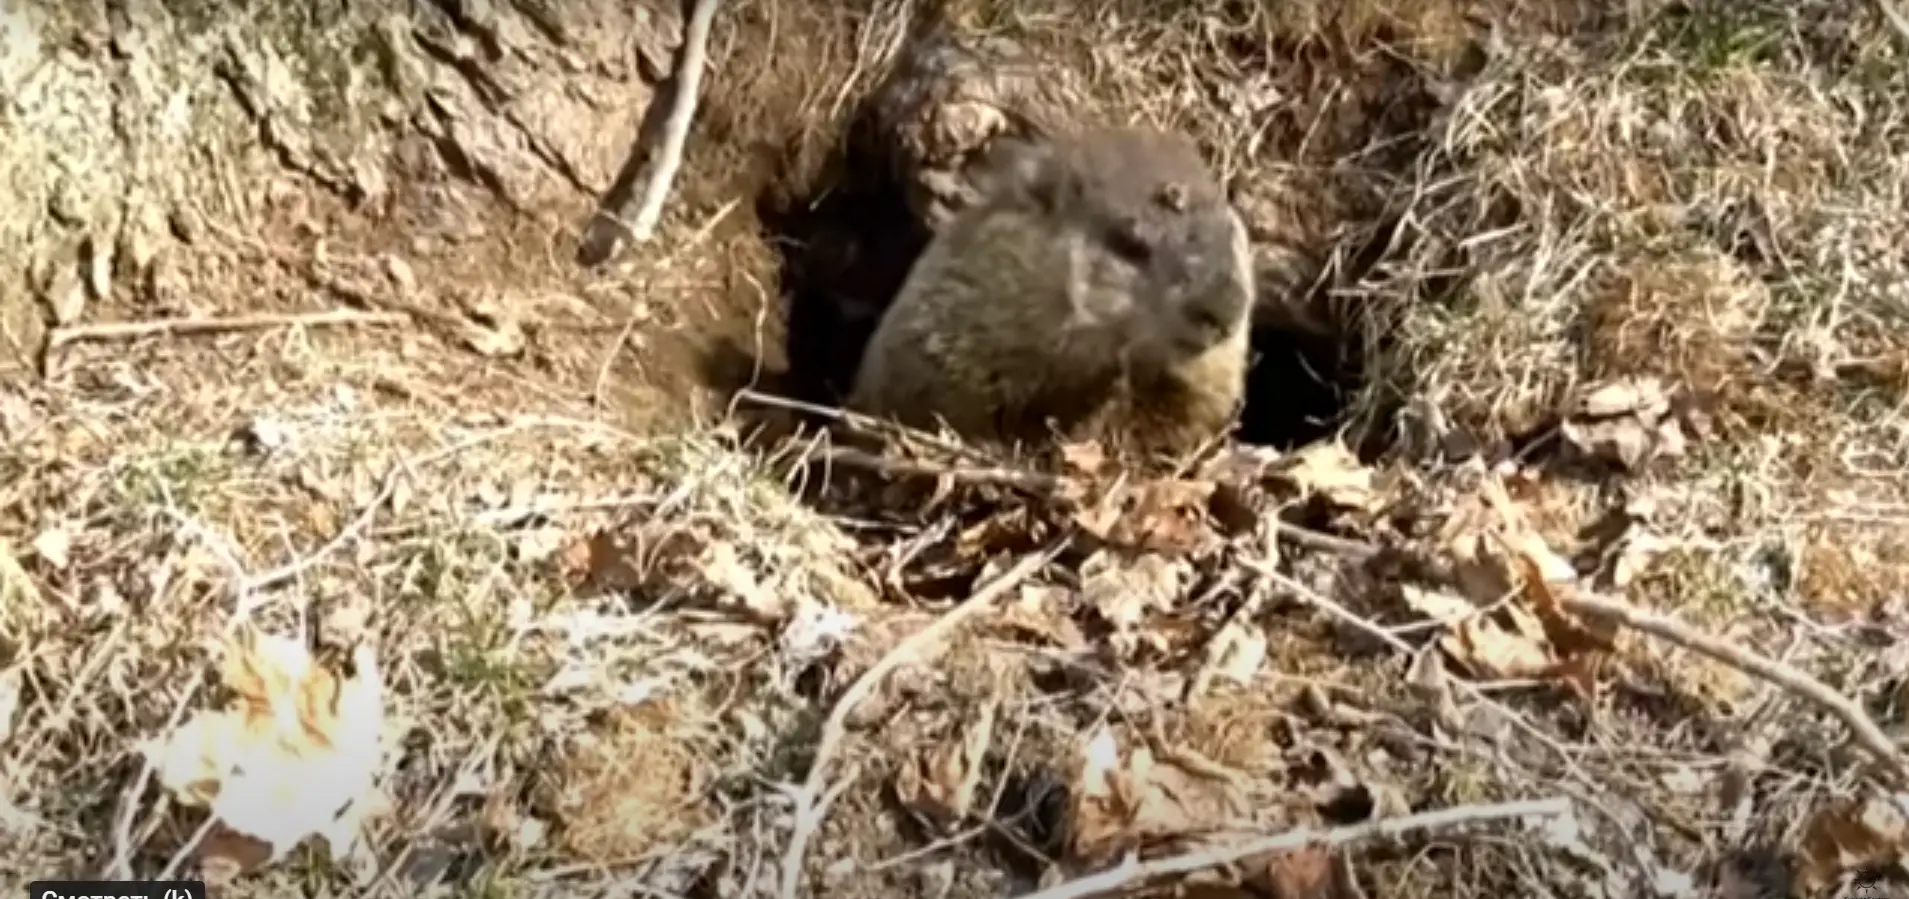 What Are Groundhogs?